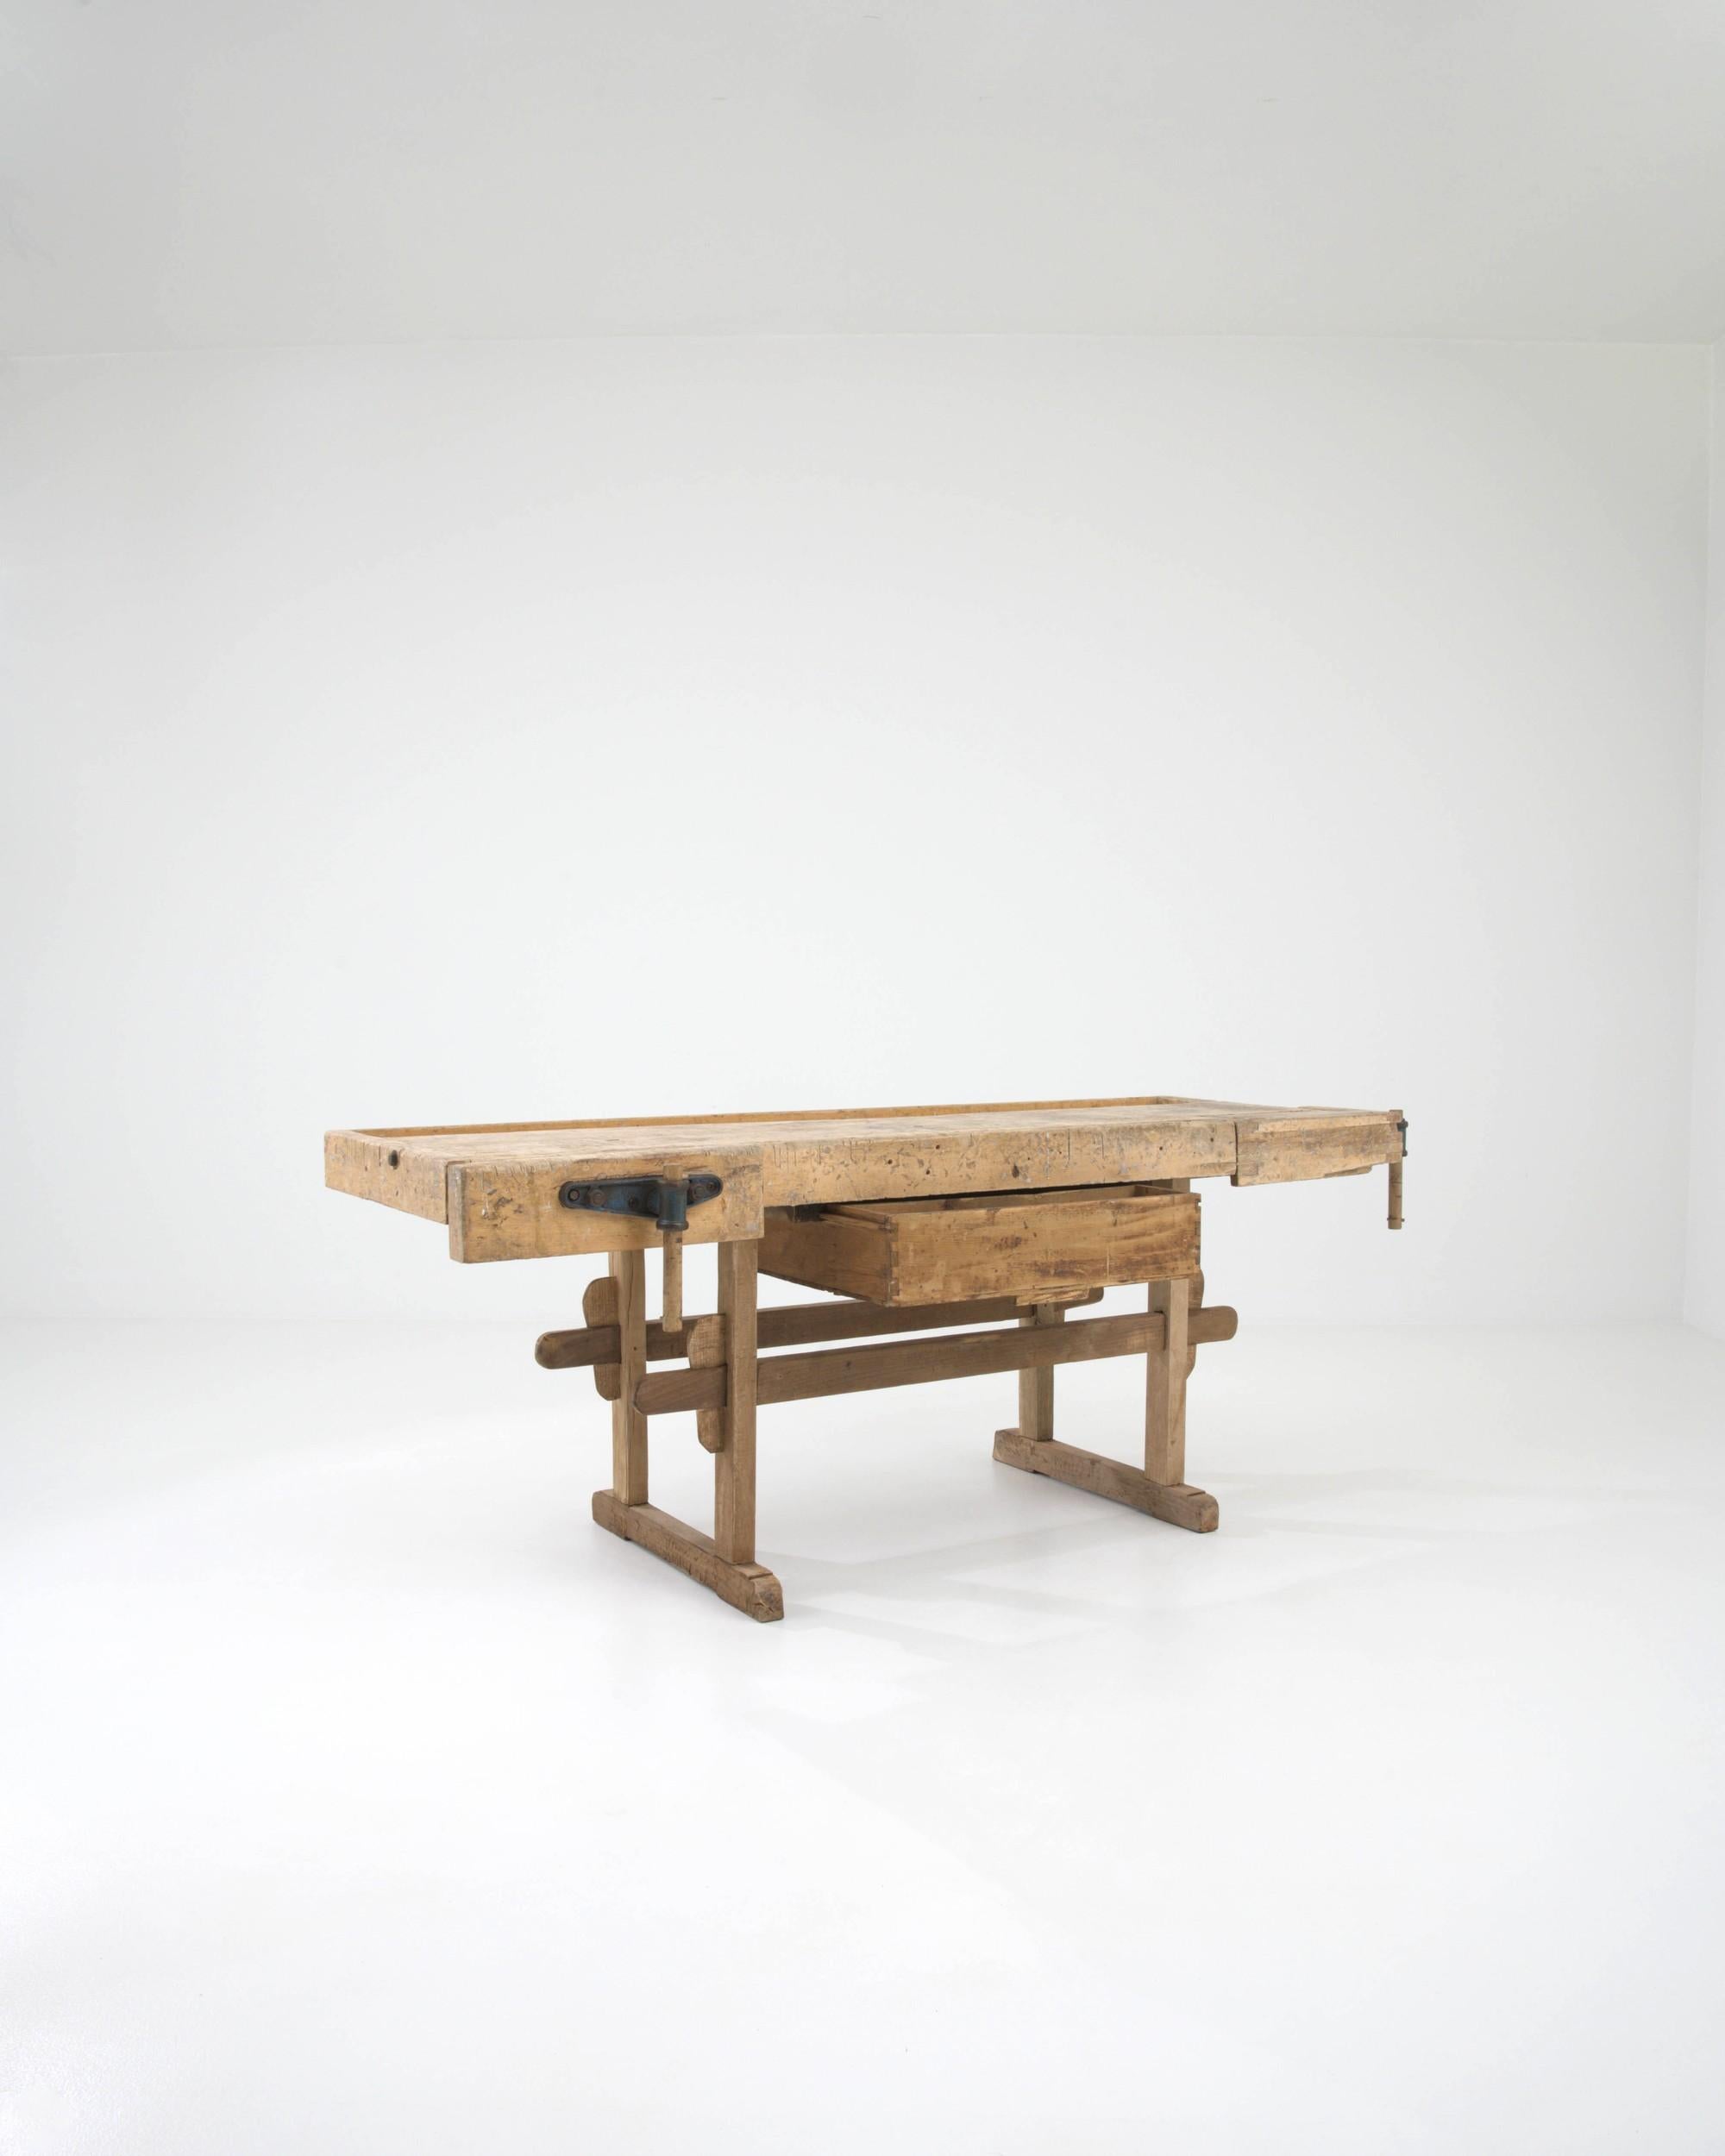 20th Century Central European Industrial Wooden Work Table For Sale 2